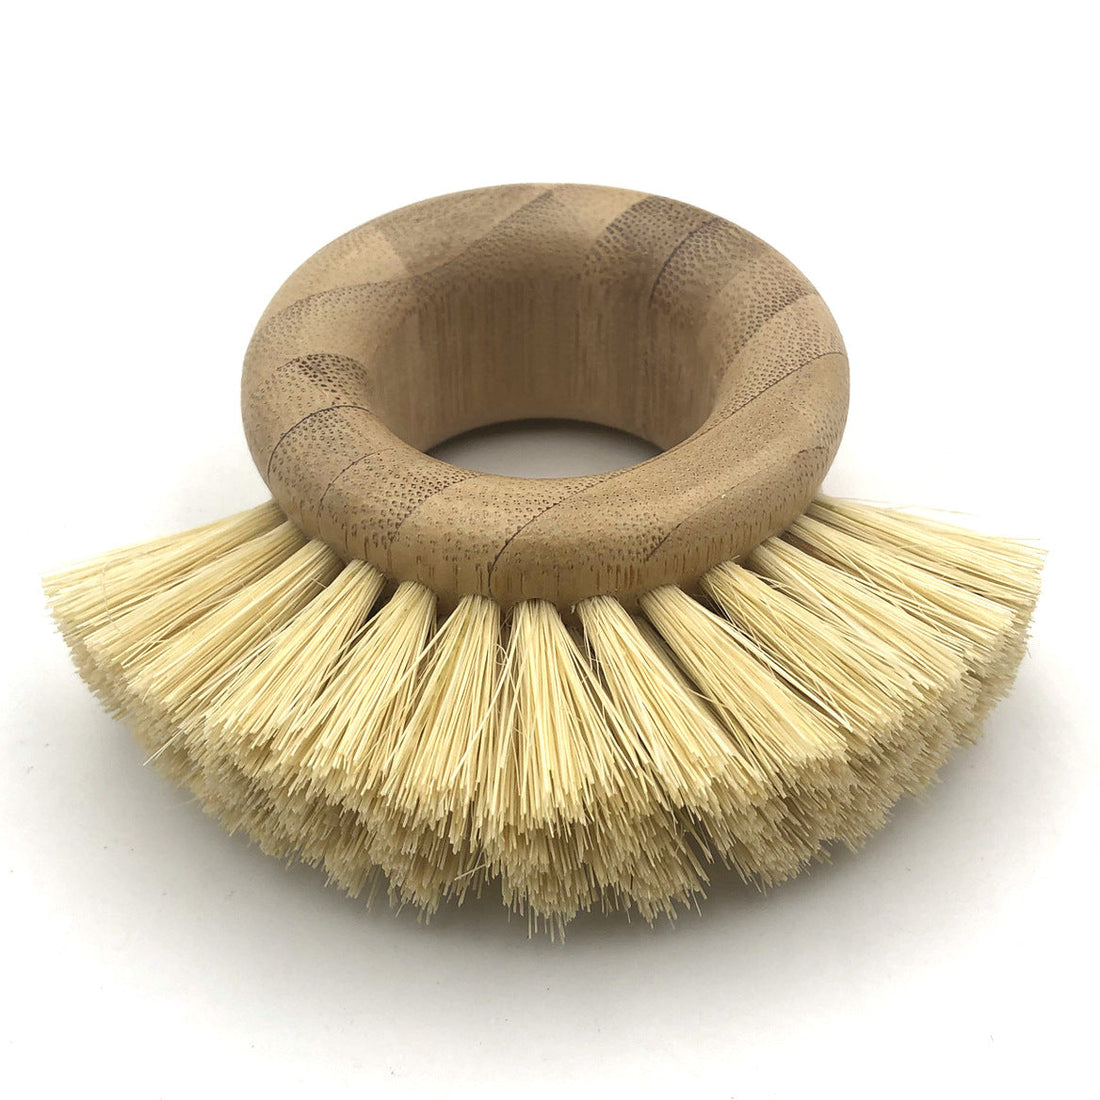 Wooden kitchen cleaning brush